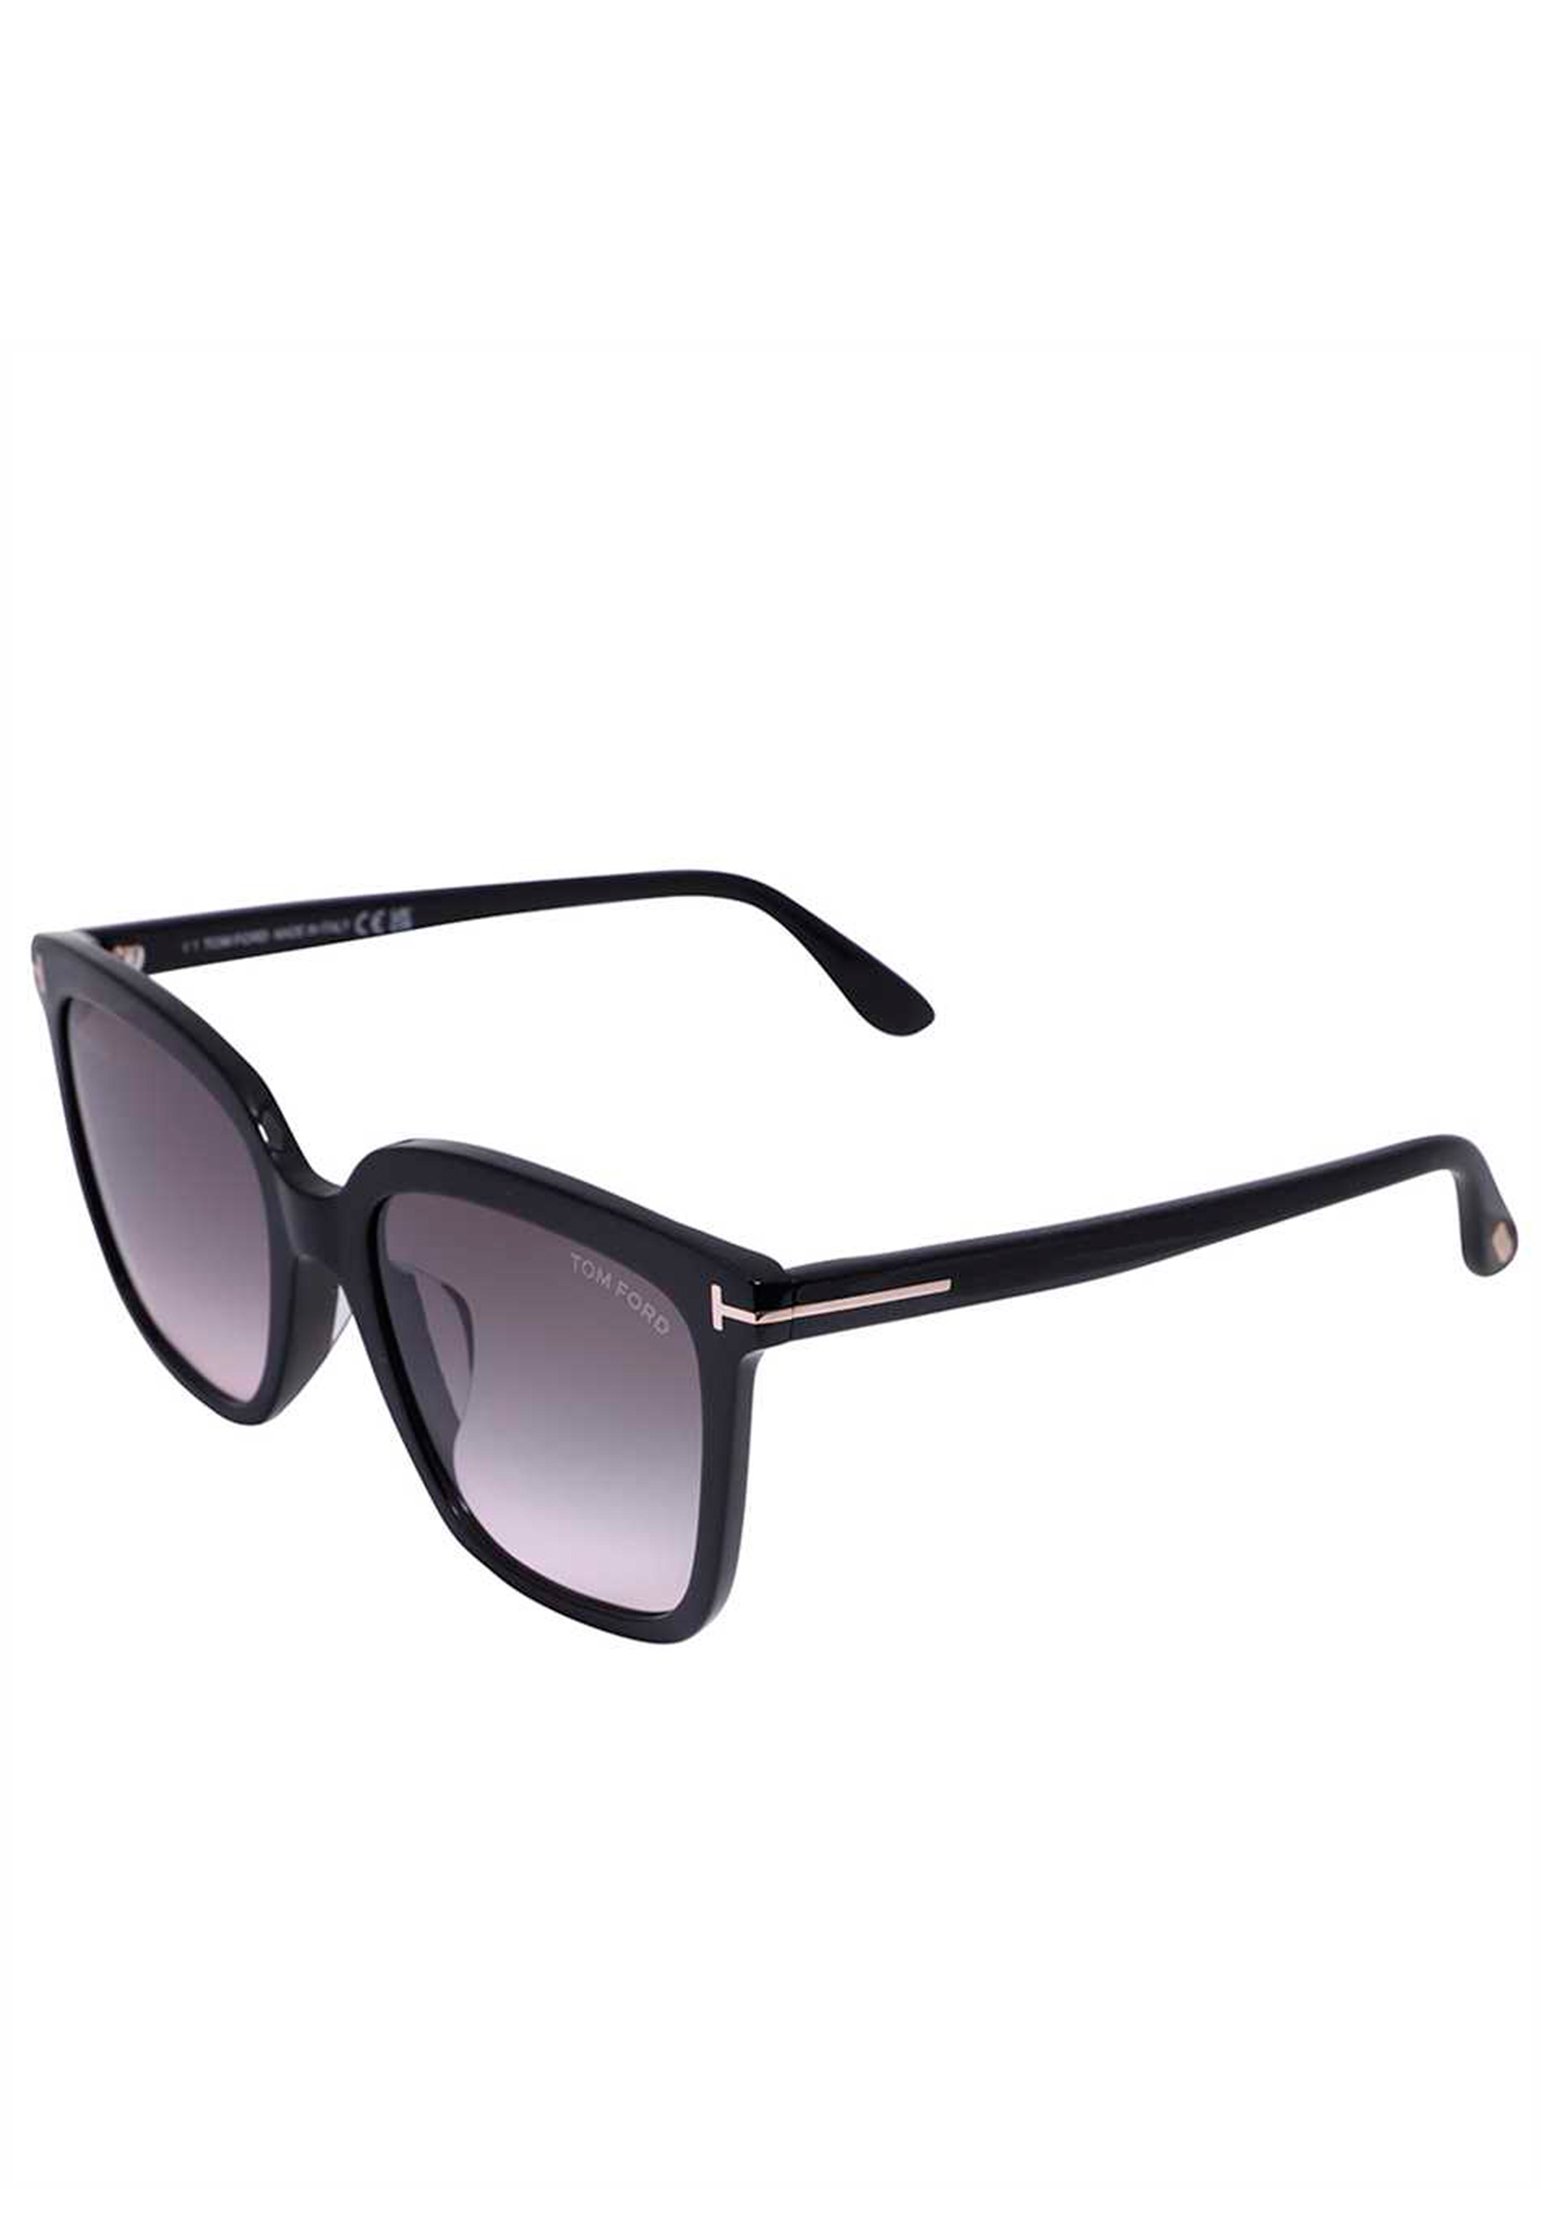 Sunglass TOM FORD Color: black (Code: 1657) in online store Allure